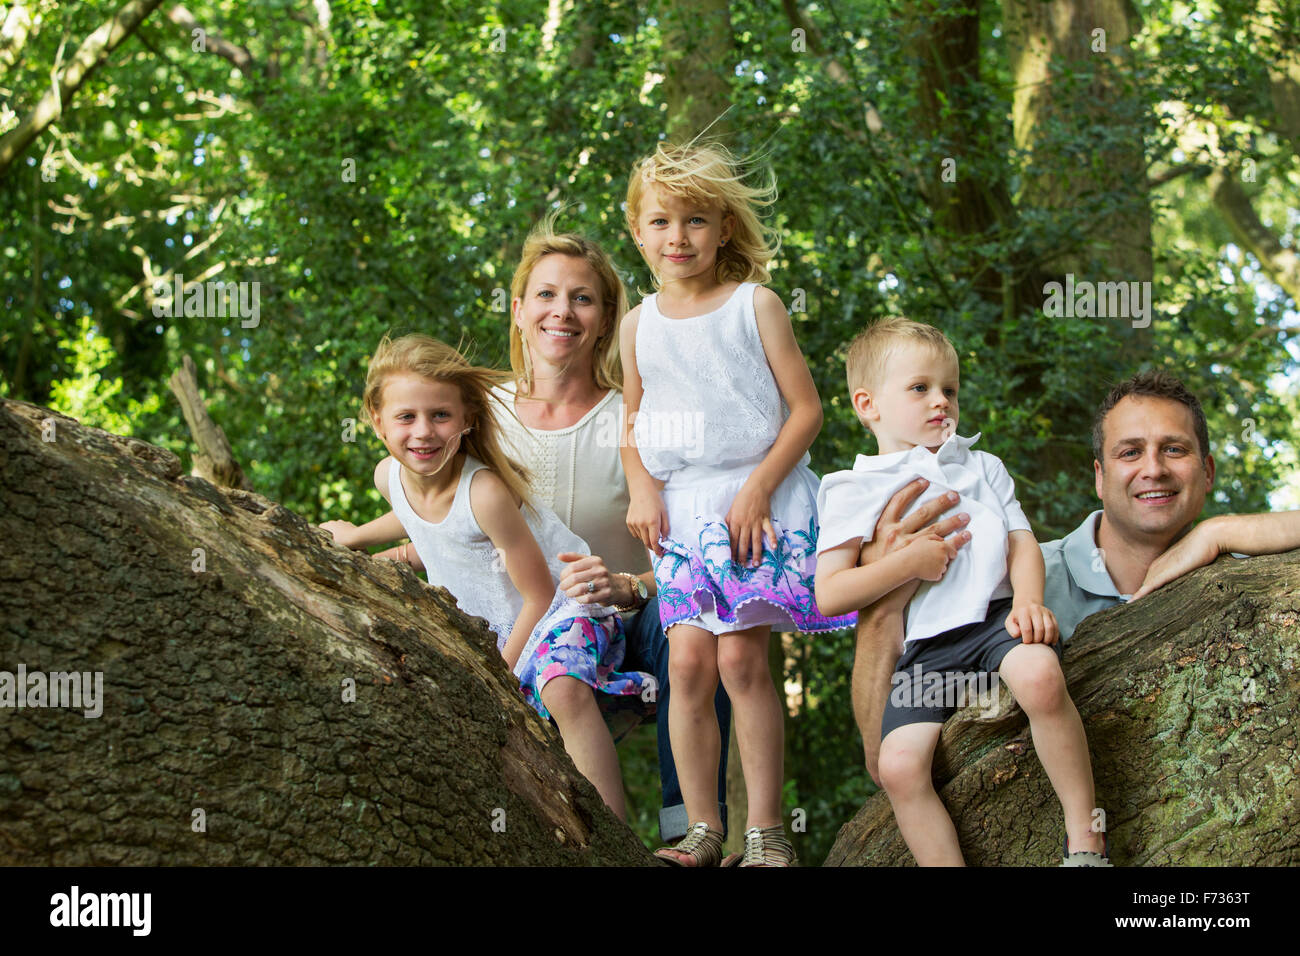 Family with three children by a tree in a forest, posing for a picture. Stock Photo